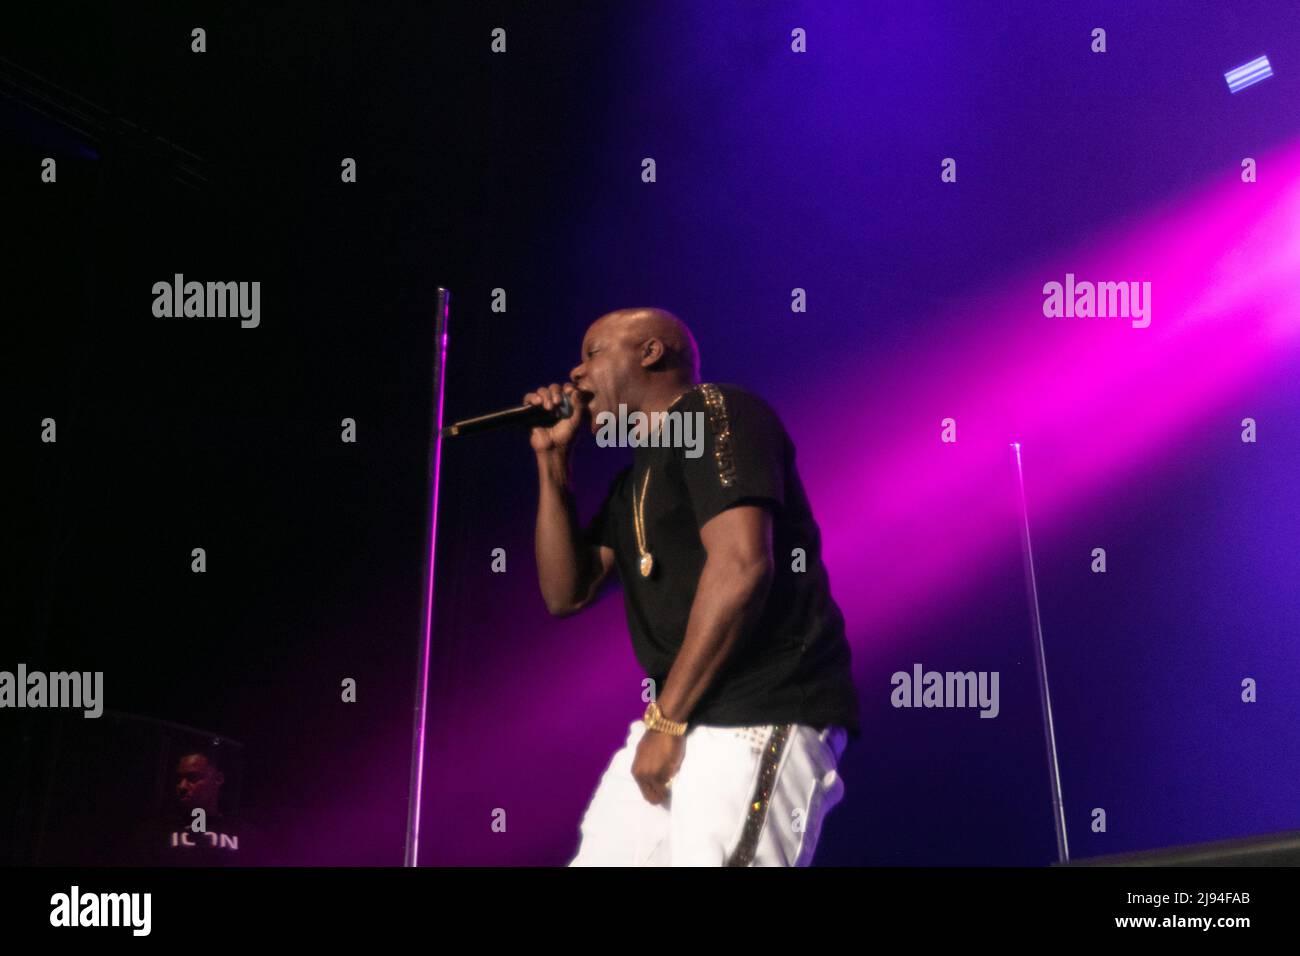 Too Short performs with Mount Westmore on Thursday, May 19, 2022 at Pechanga Arena in San Diego, California. Mount Westmore is a hip hop supergroup that includes Snoop Dogg, Ice Cube, E-40, and Too Short. They will be releasing their debut album later this year. (Photo by Rishi Deka/Sipa USA) Credit: Sipa USA/Alamy Live News Stock Photo